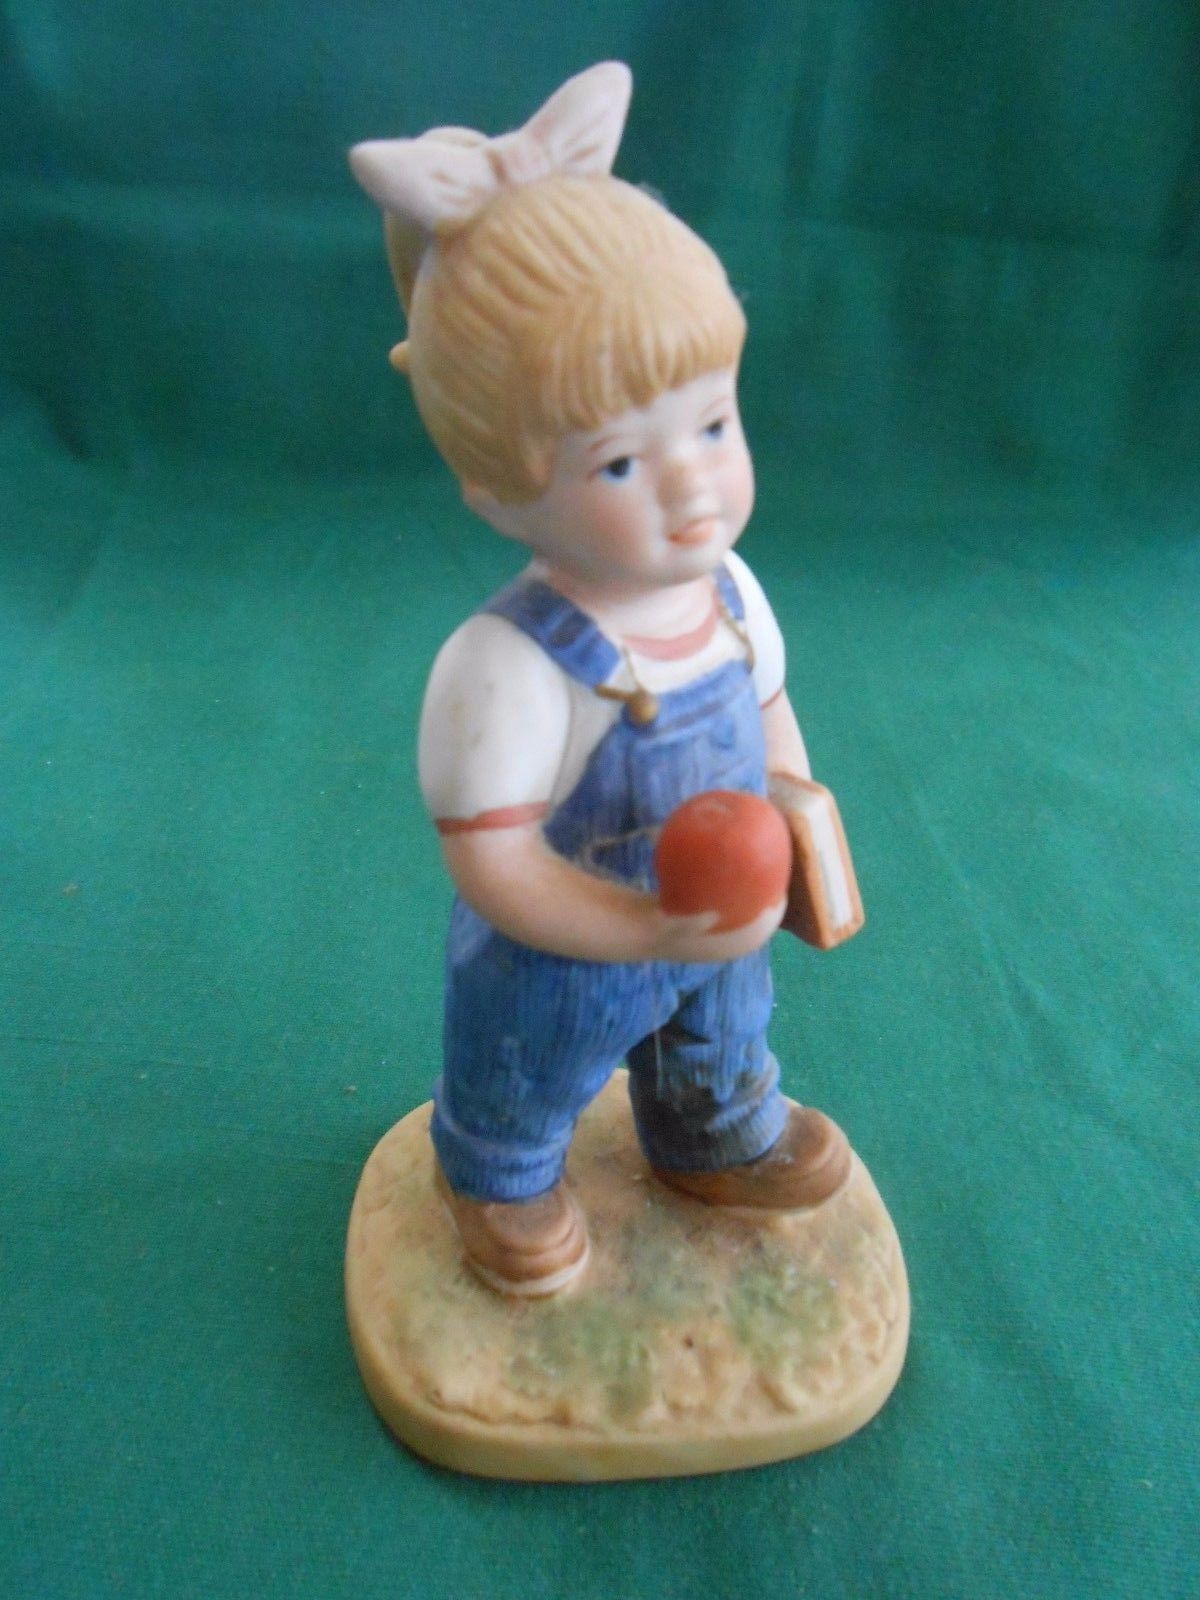 Primary image for Great Collectible DENIM DAYS Figure by HOMCO "School Girl"